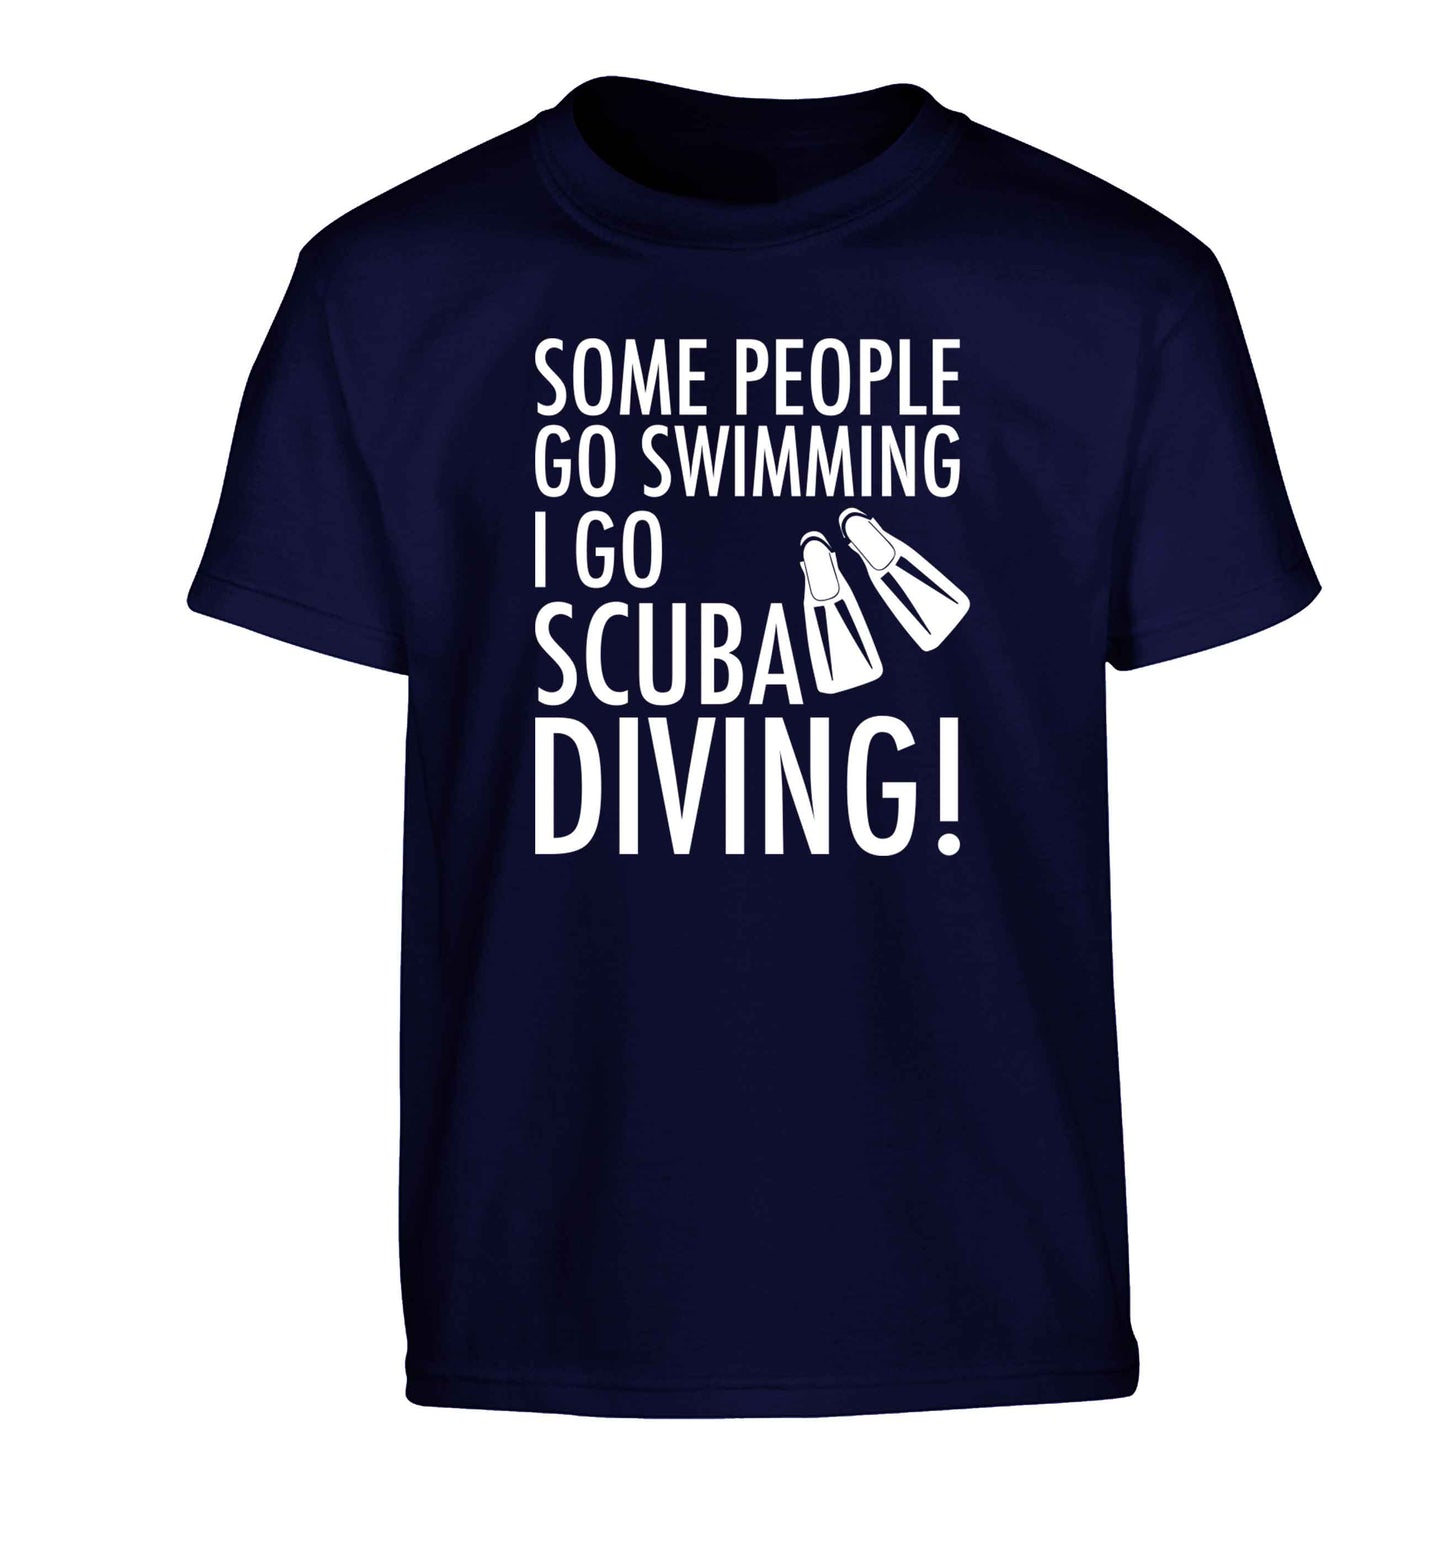 Some people go swimming I go scuba diving! Children's navy Tshirt 12-13 Years